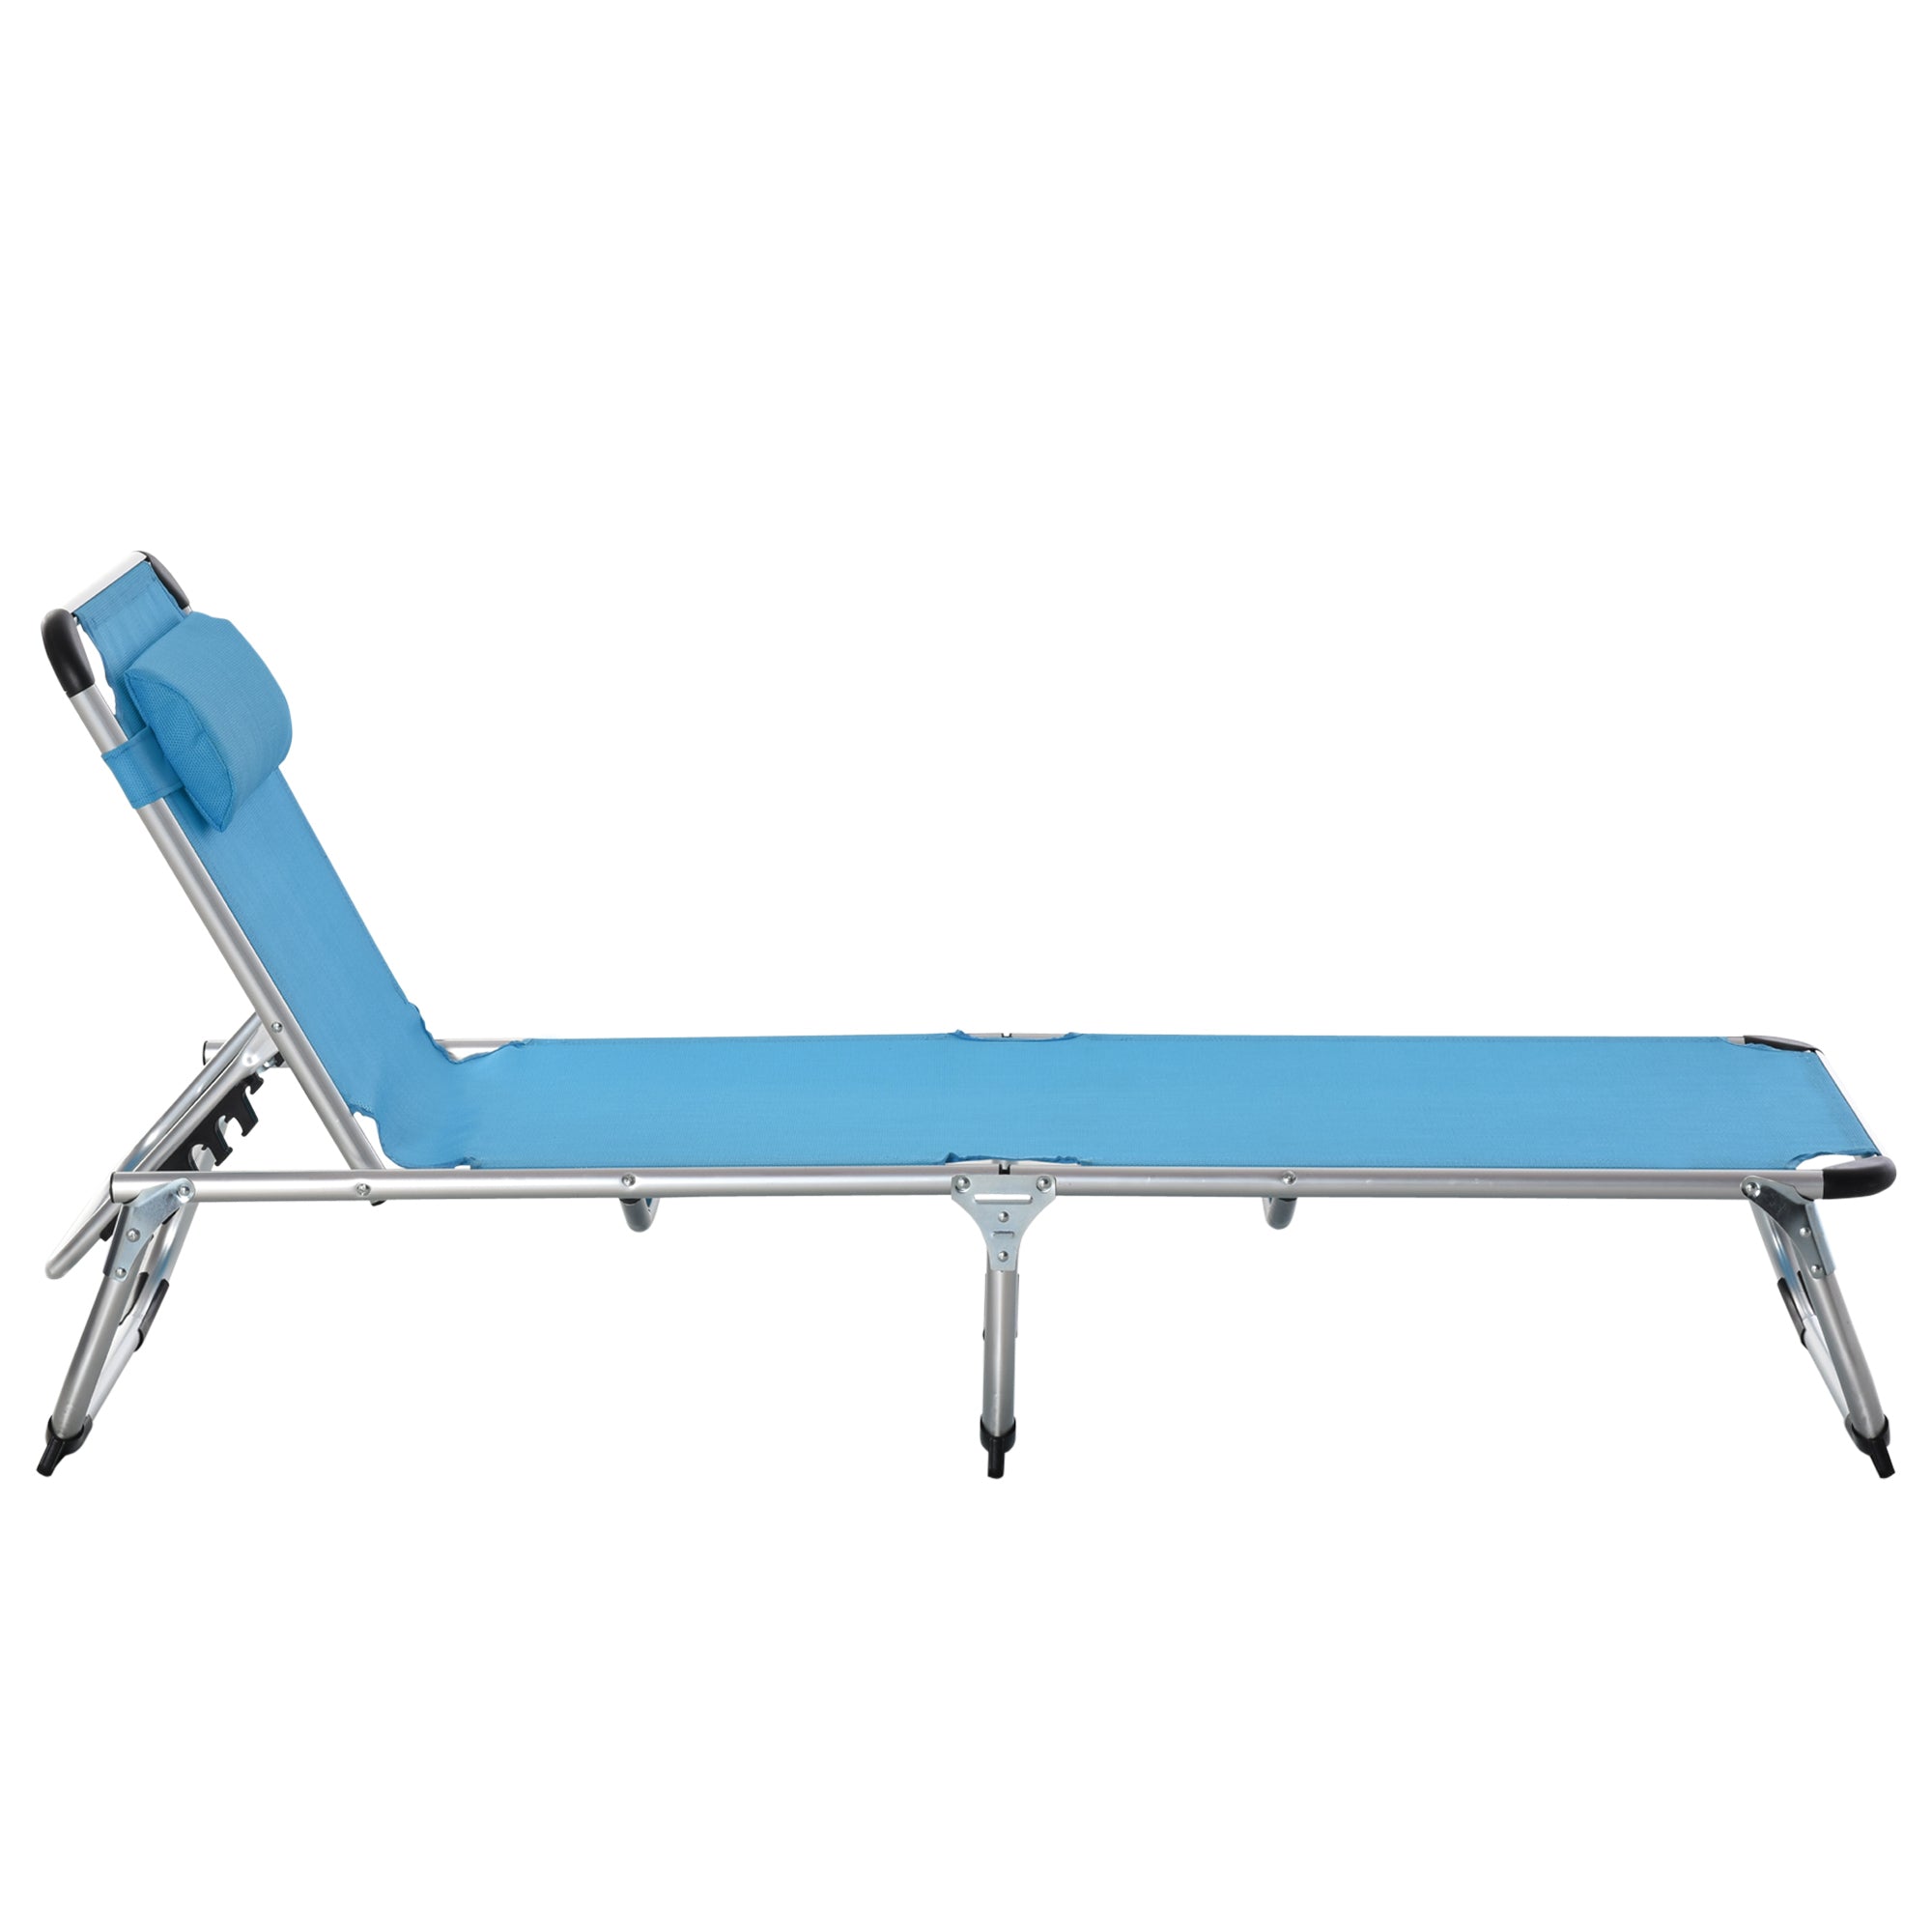 Outsunny Foldable Reclining Sun Lounger Lounge Chair Camping Bed Cot with Pillow 5-Level Adjustable Back Aluminium Frame Blue - Inspirely